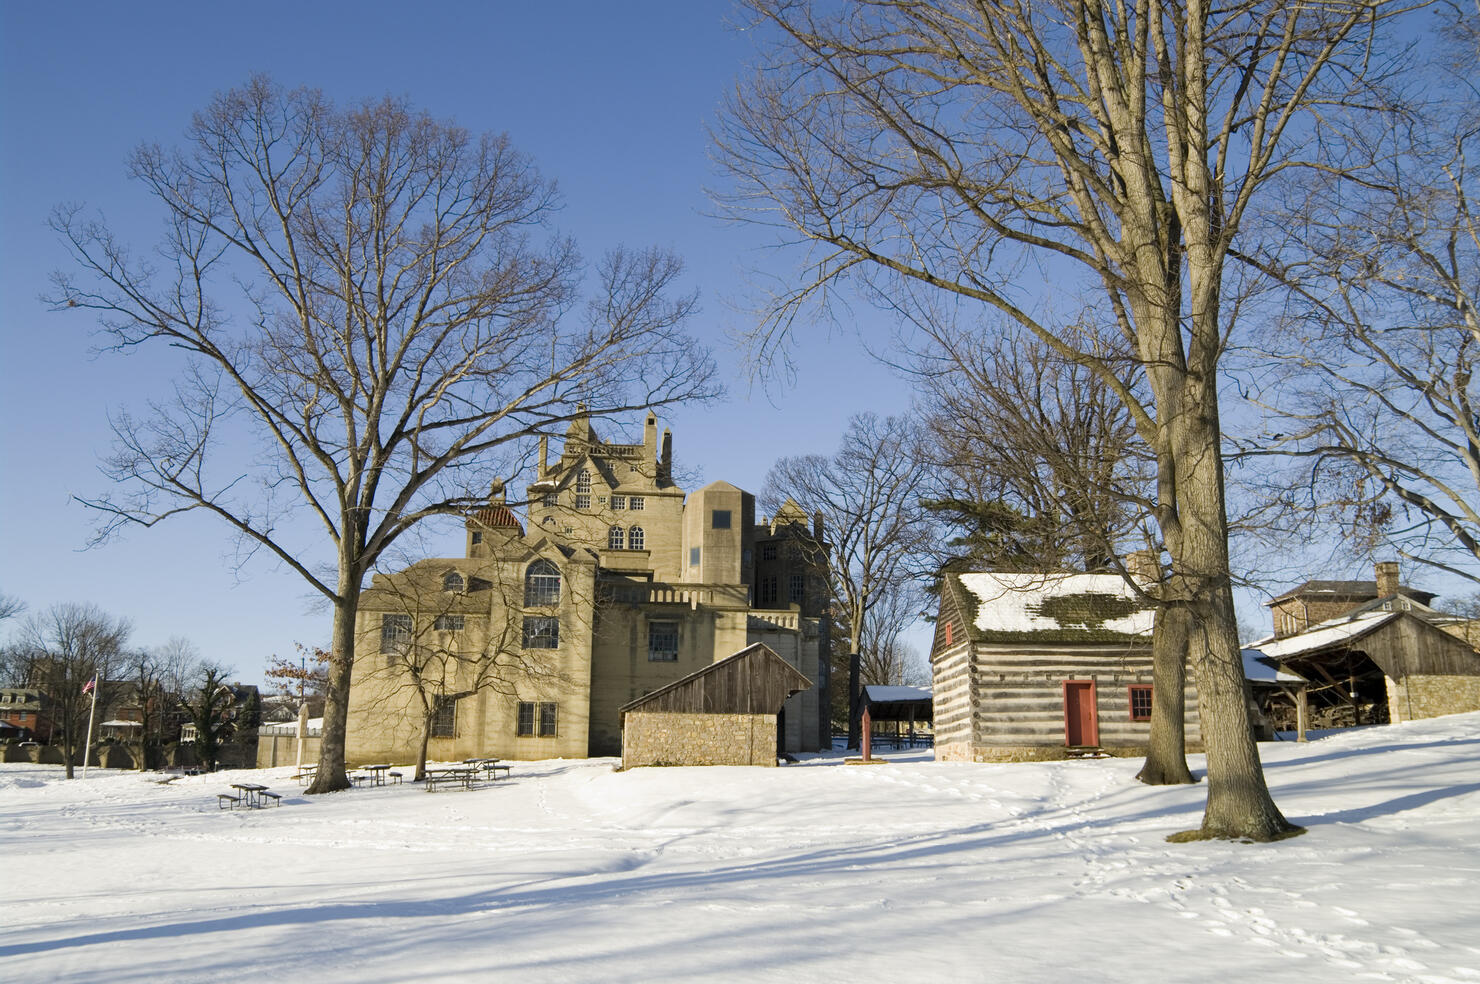 Concrete Castle and stables in the winter